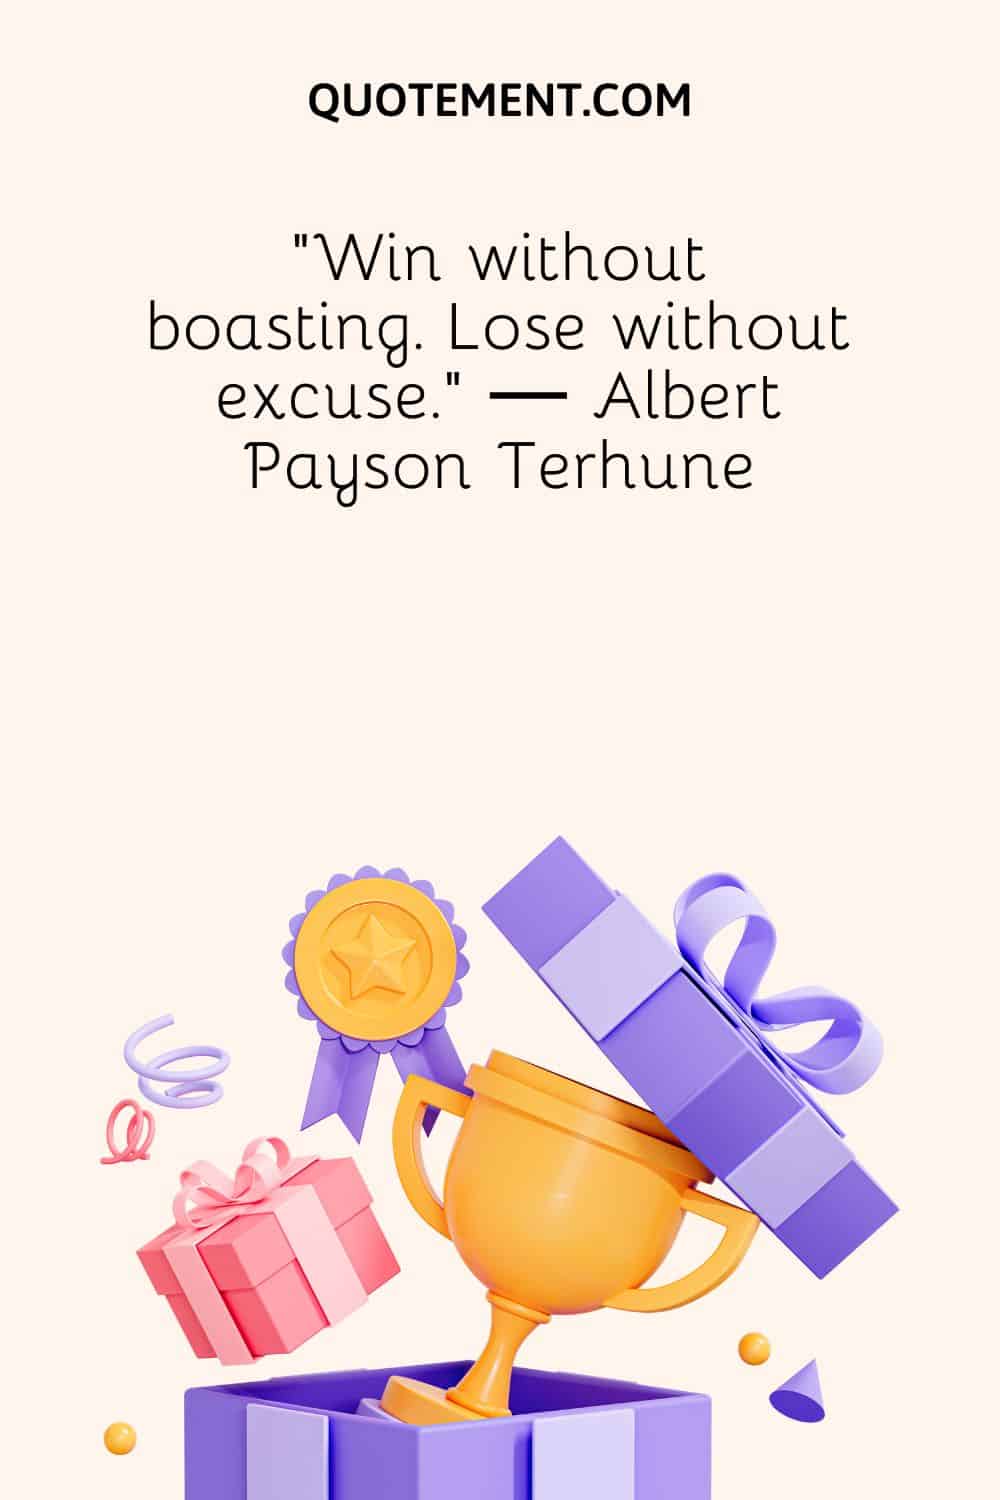 “Win without boasting. Lose without excuse.” ― Albert Payson Terhune